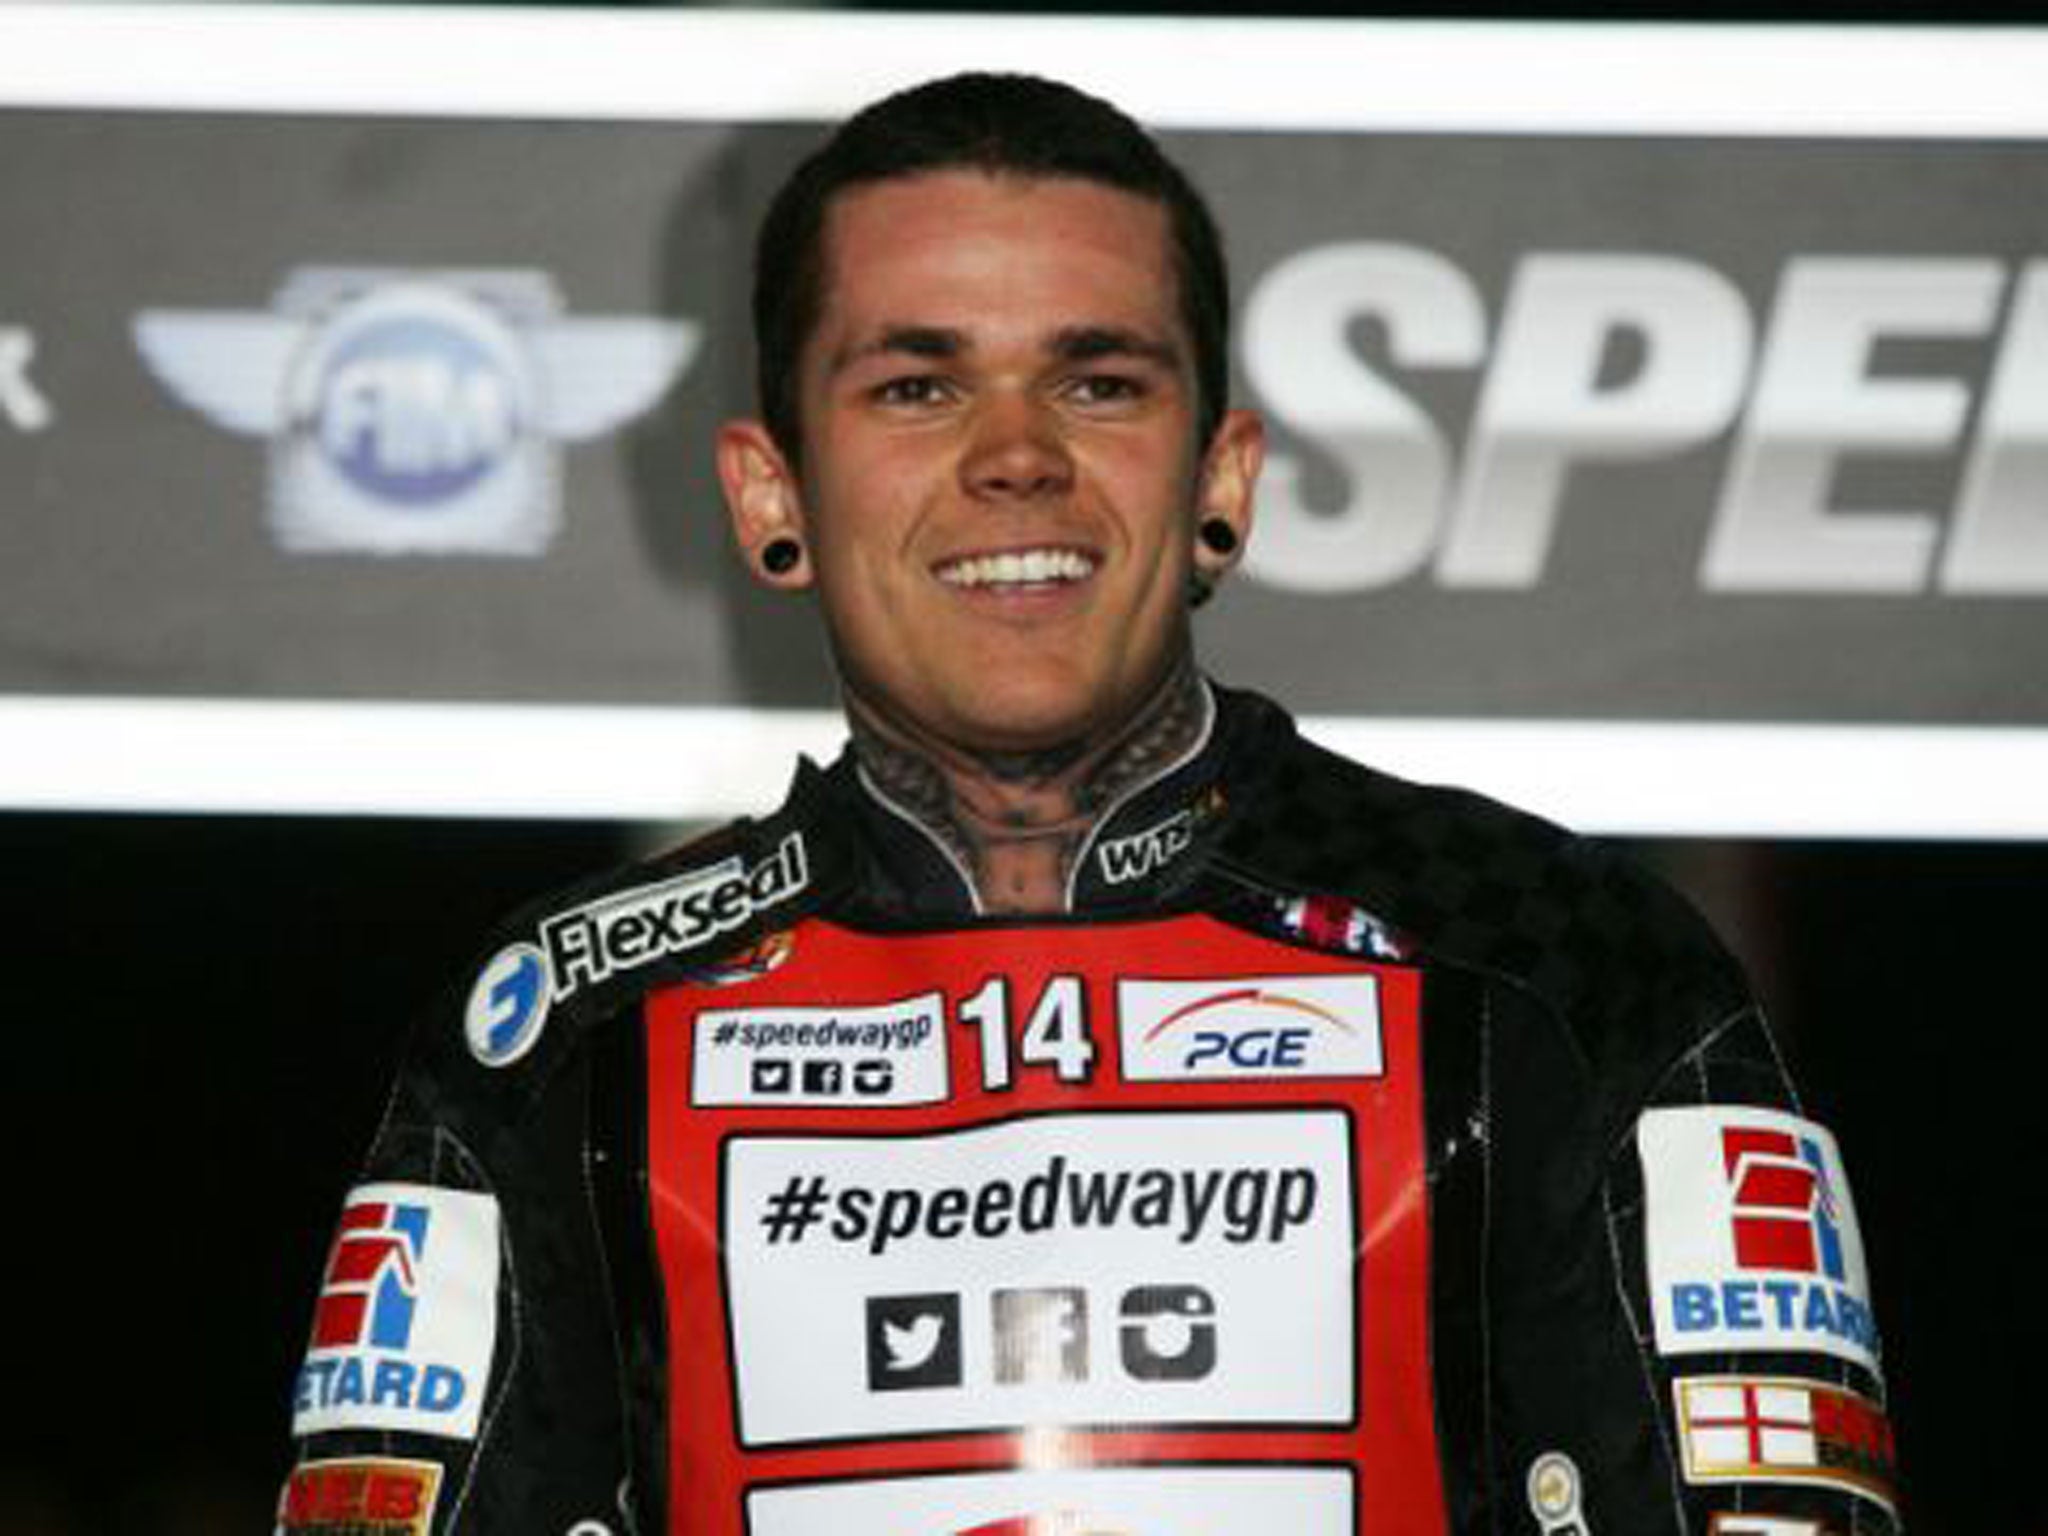 Tai Woffinden goes into today’s British Grand Prix riding high